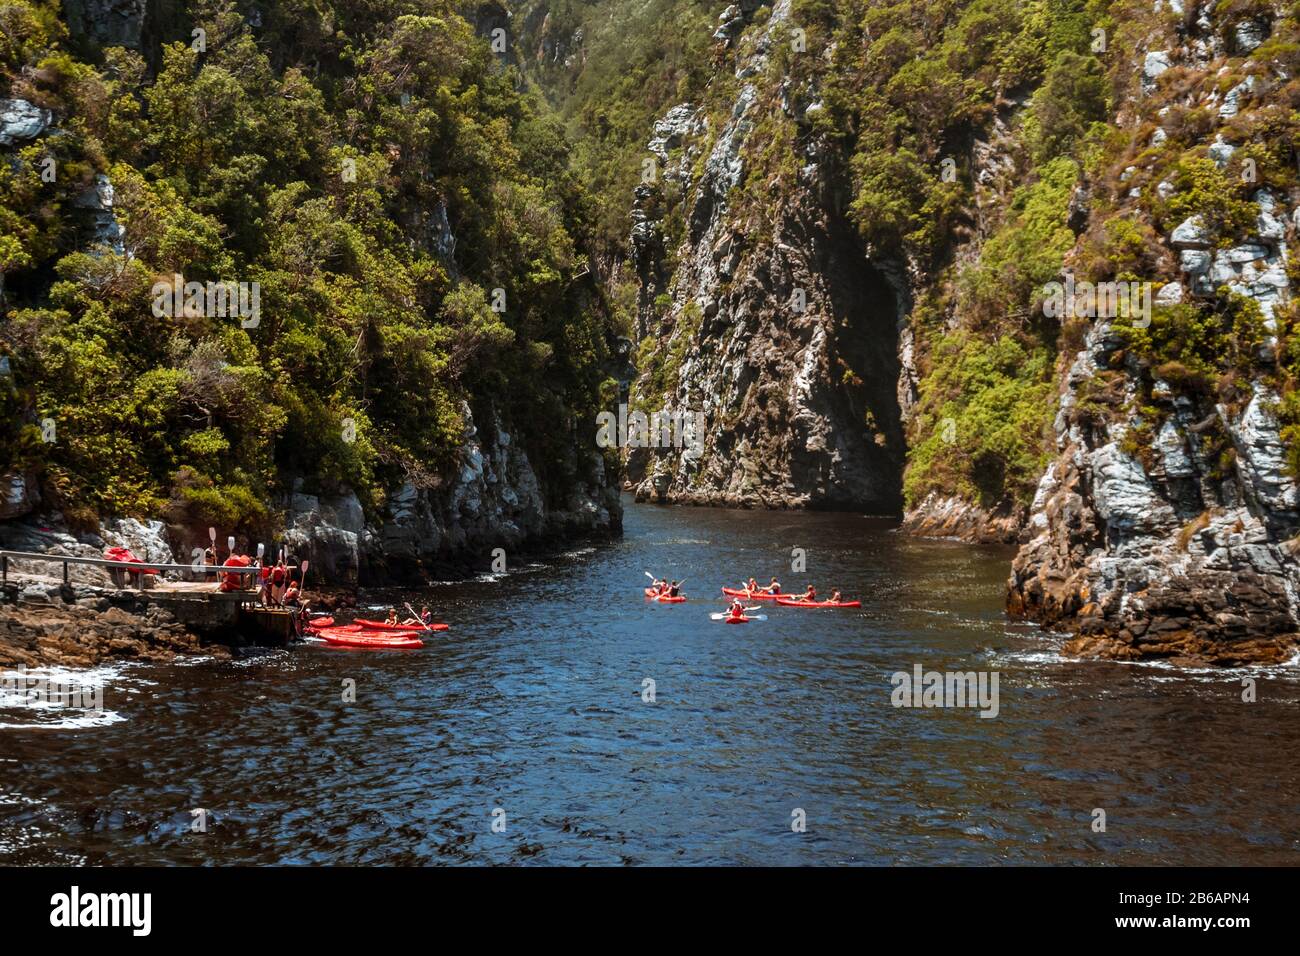 A group of people in Kayaks setting out on a tour up Storms River gorge from Storms River Mouth in Tsitsikamma along the Garden Route, South Africa Stock Photo